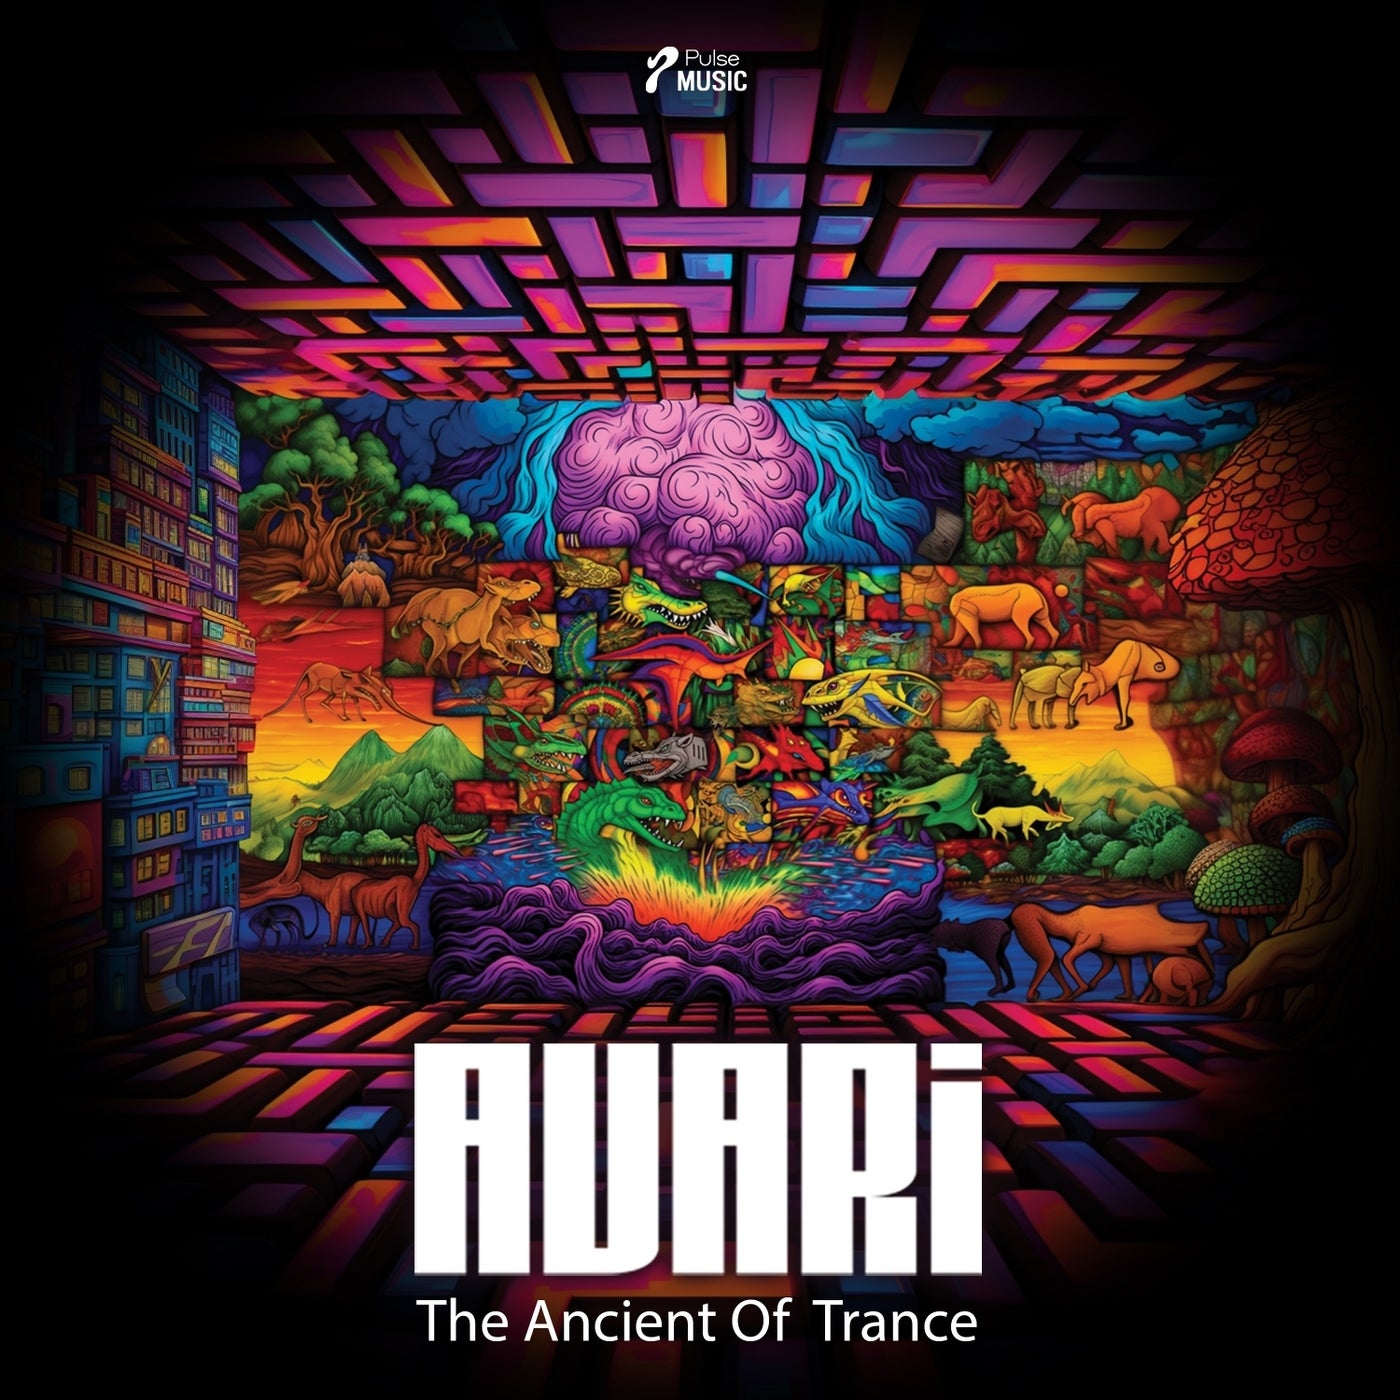 The Ancient of Trance